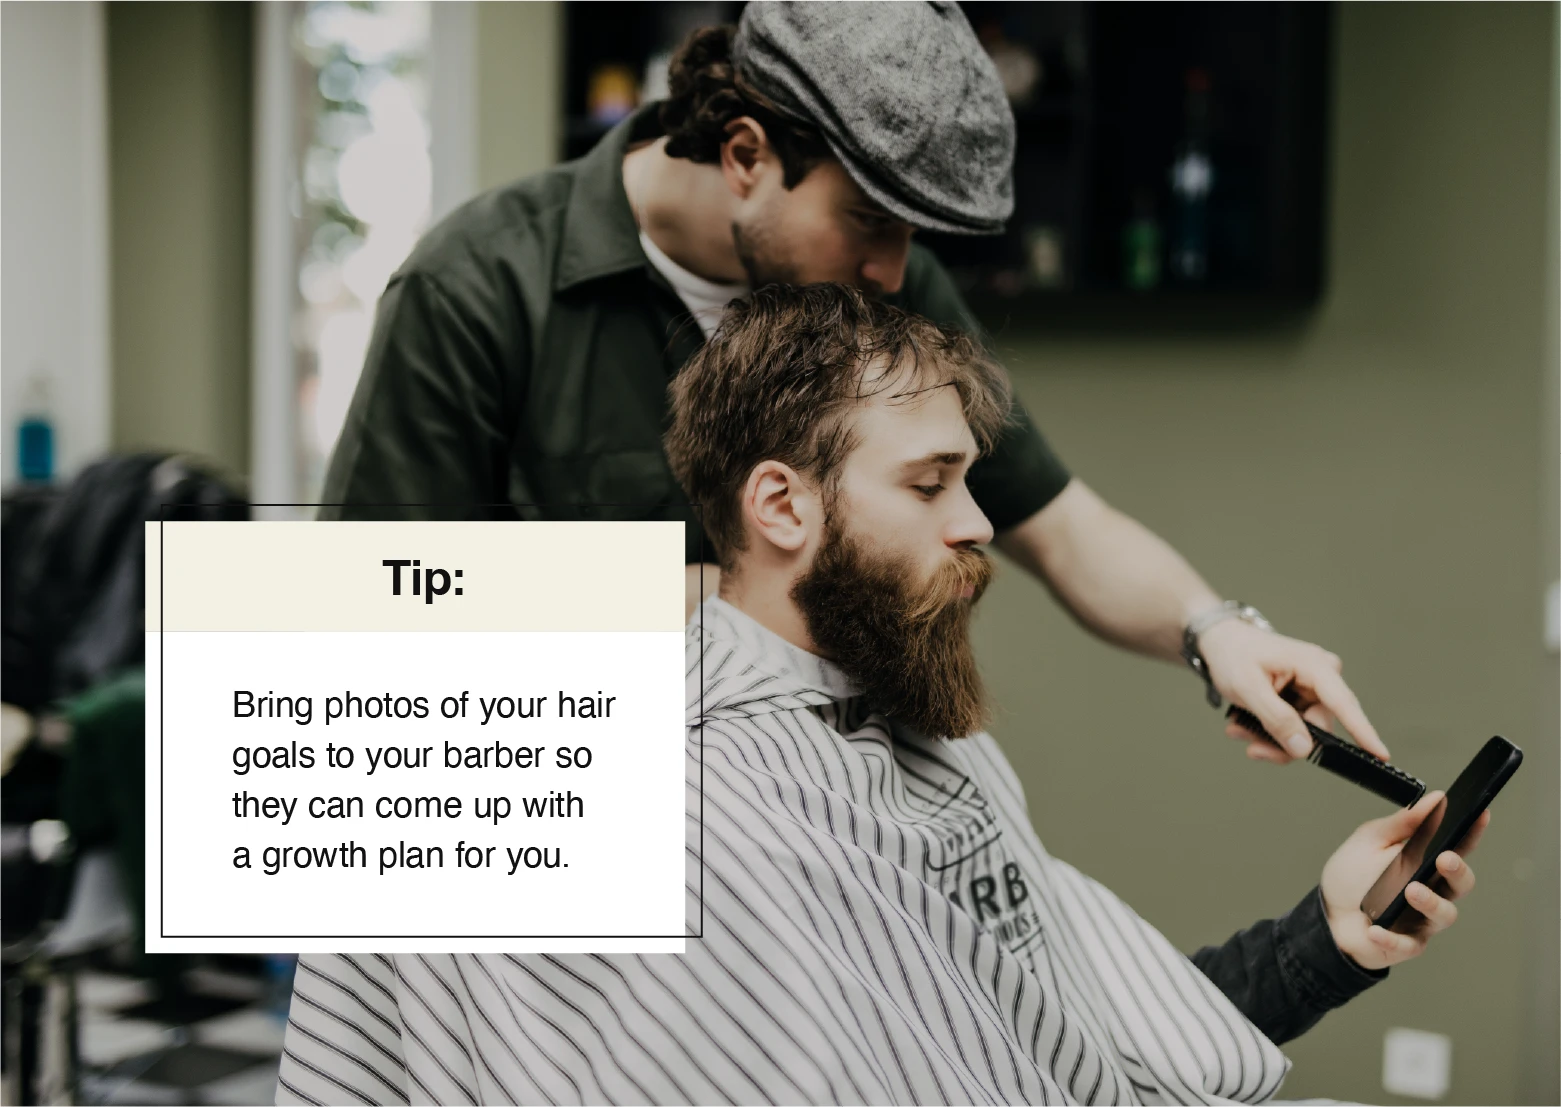 Bring photos of your hair goals to your barber so they can come up with a hair growth plan for you.